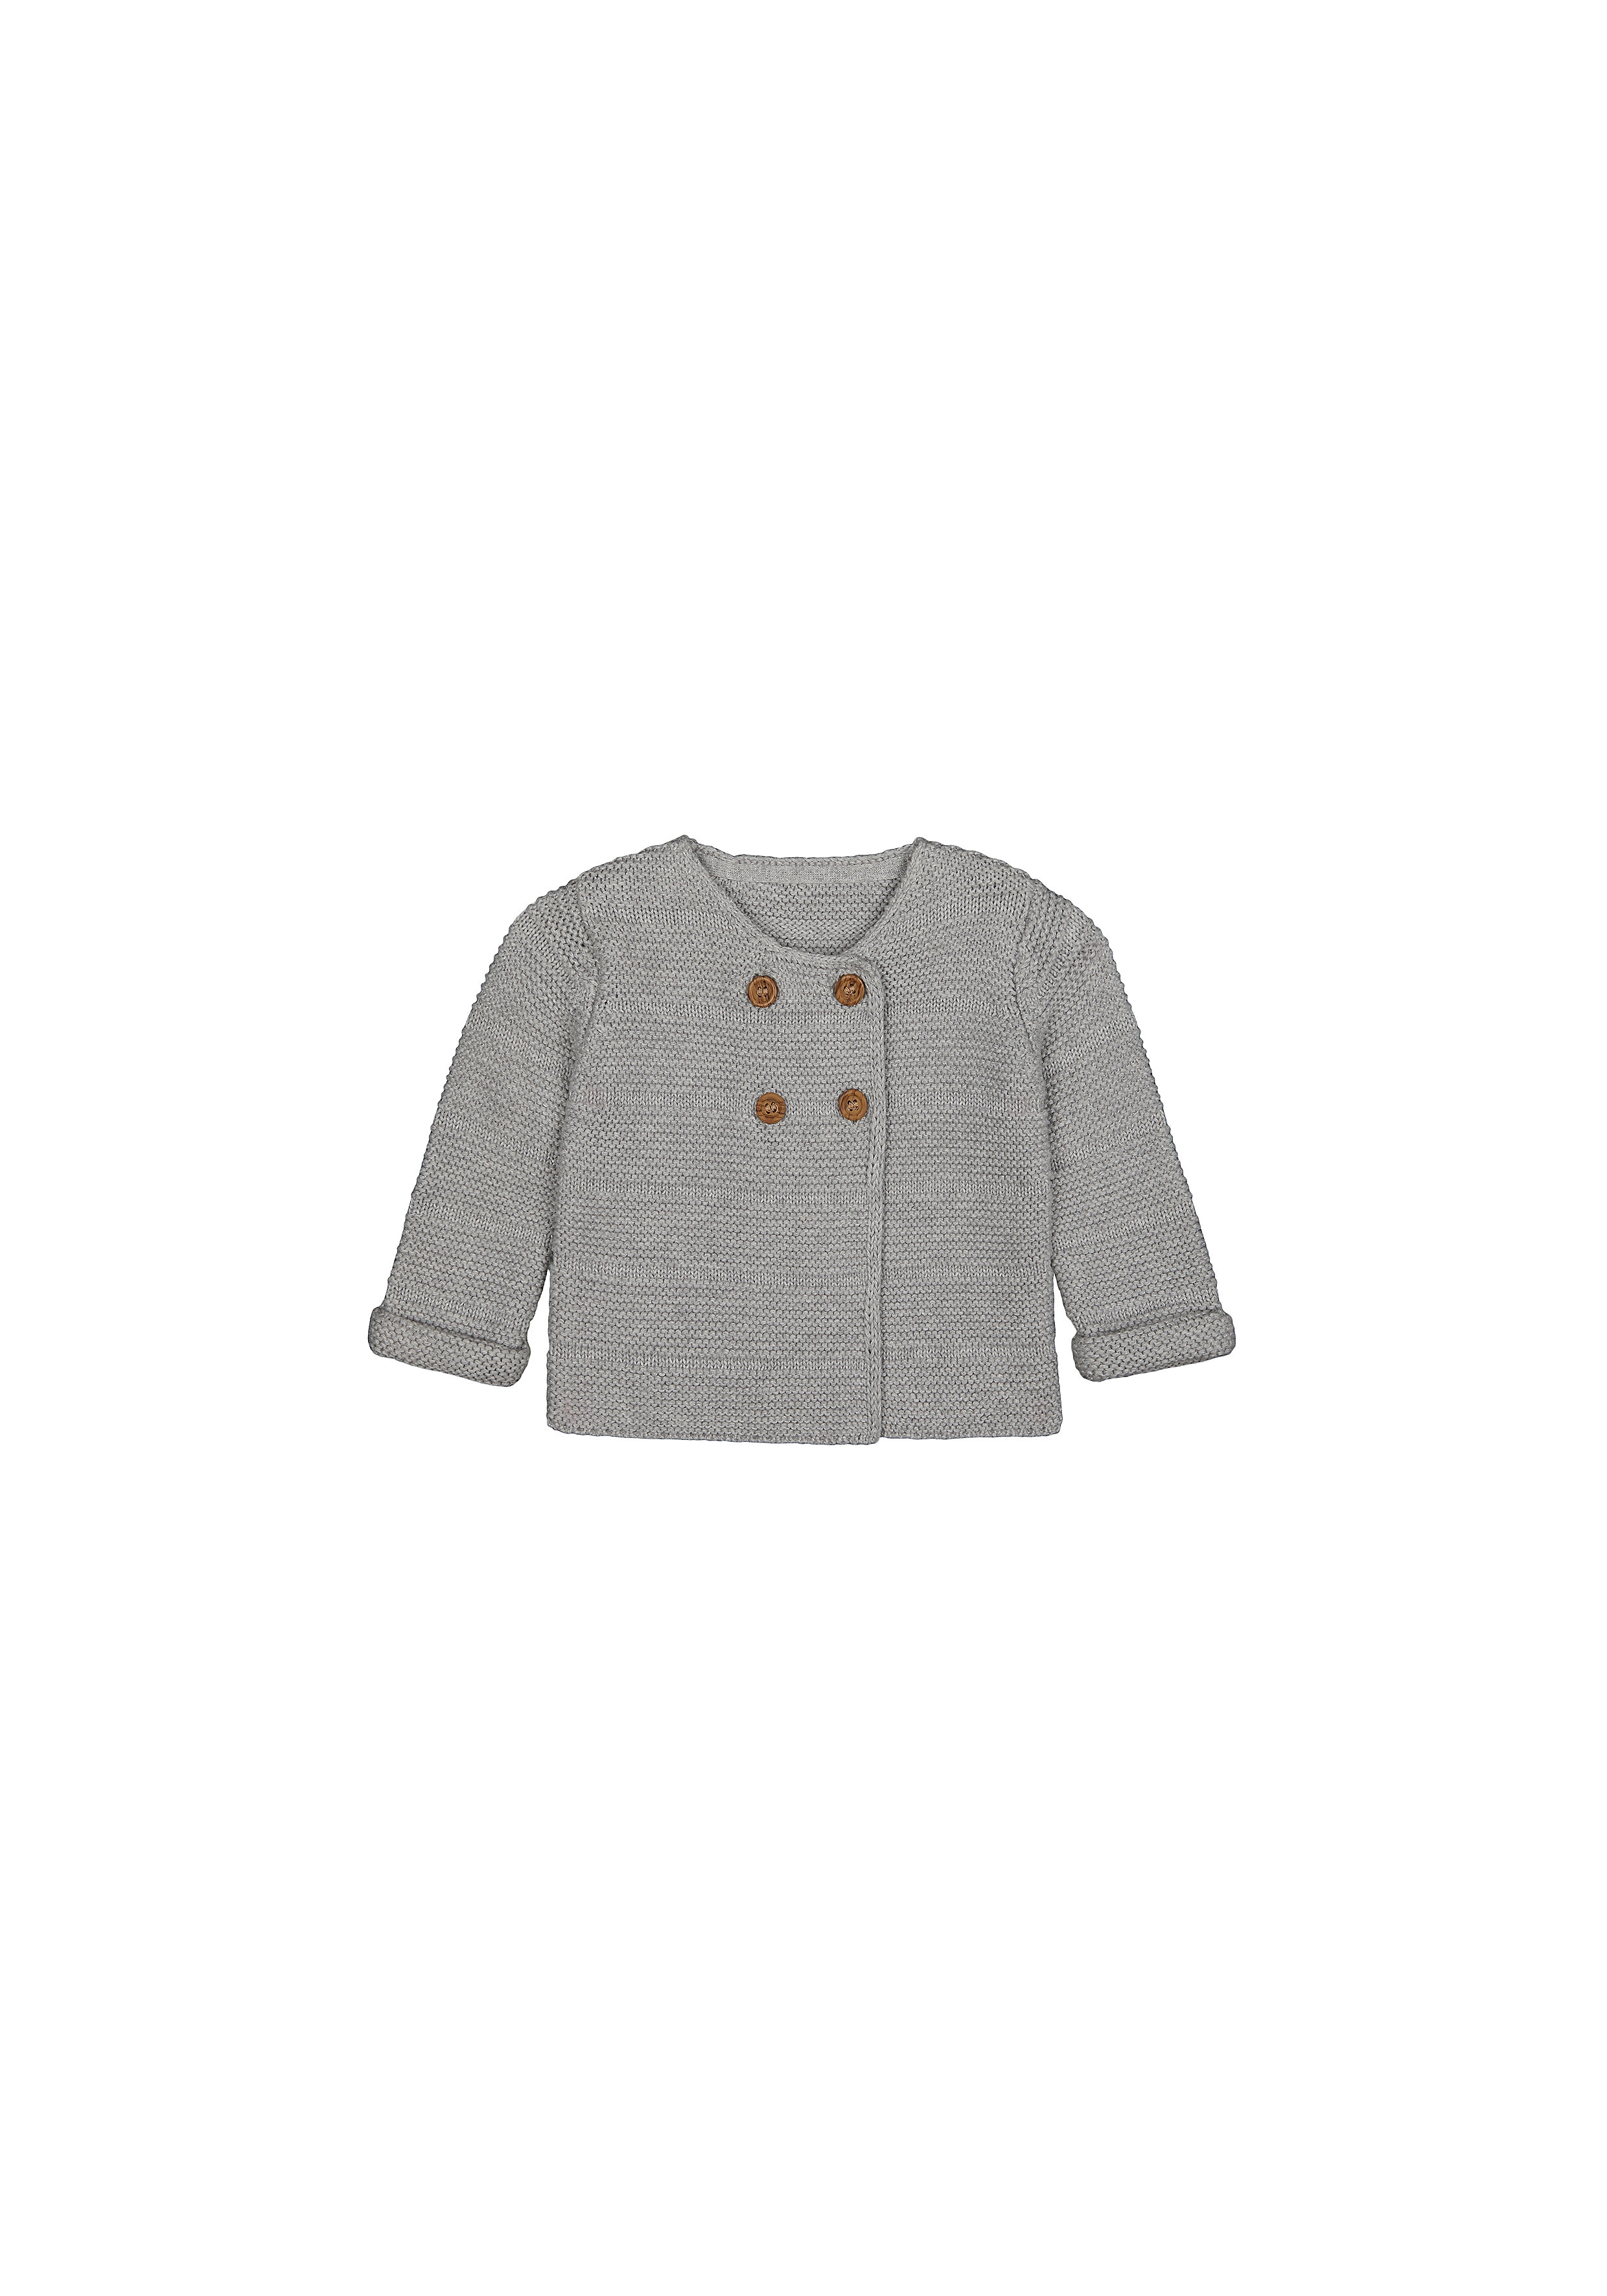 Mothercare | Boys Full Sleeves Sweaters  - Grey